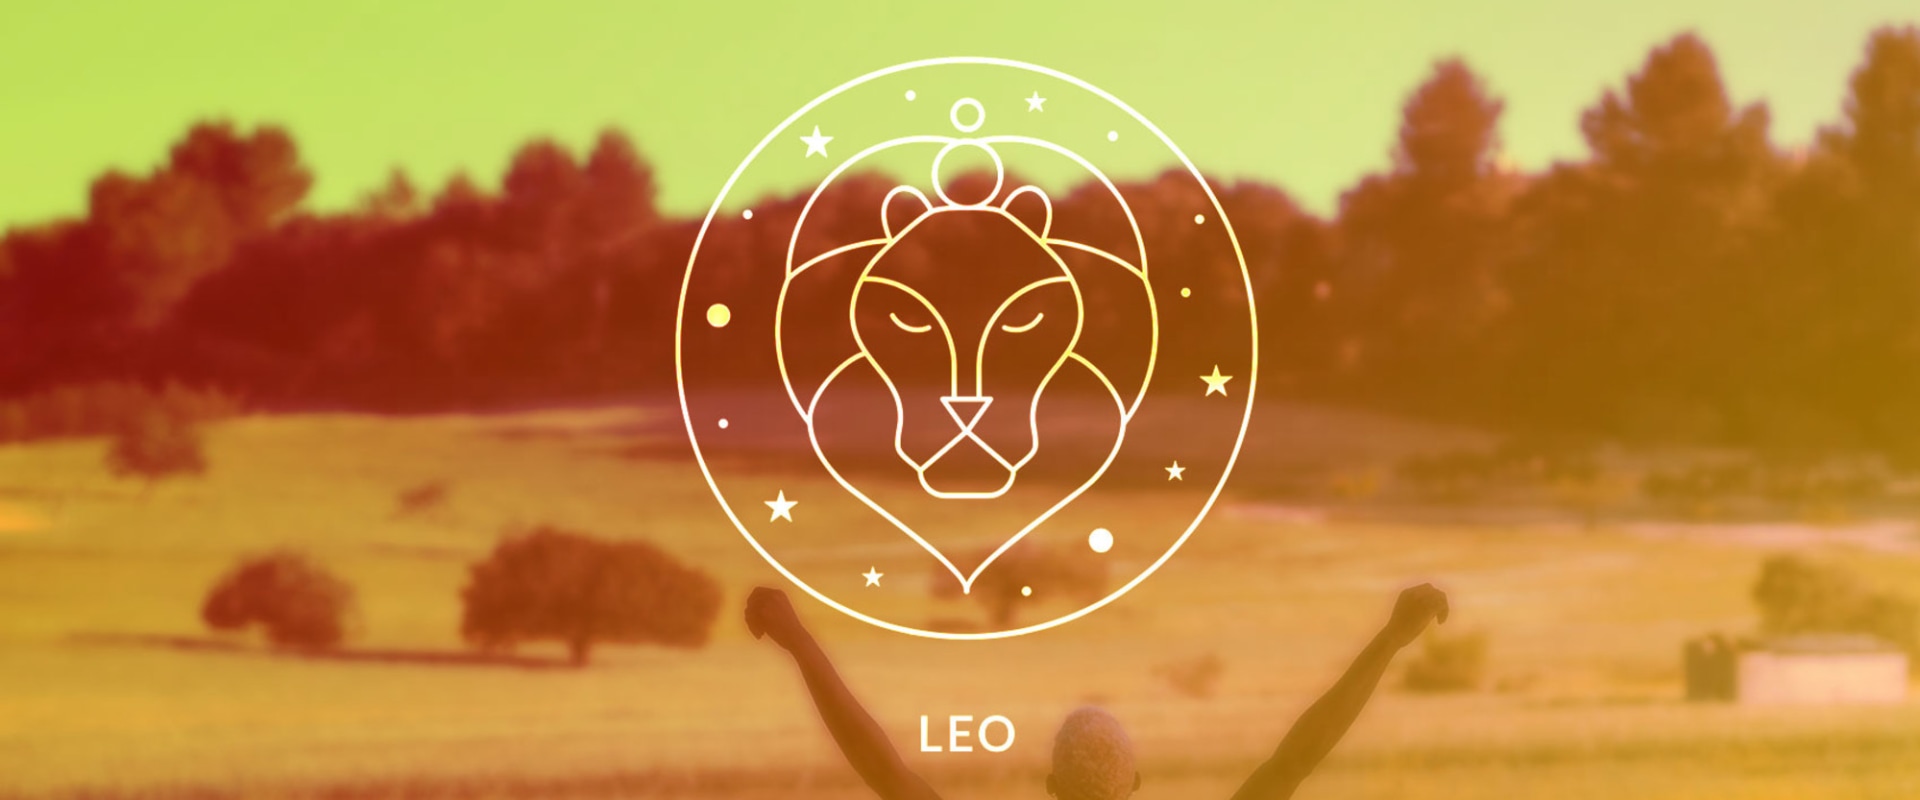 Leo Meaning: A Guide to the Astrological Sign